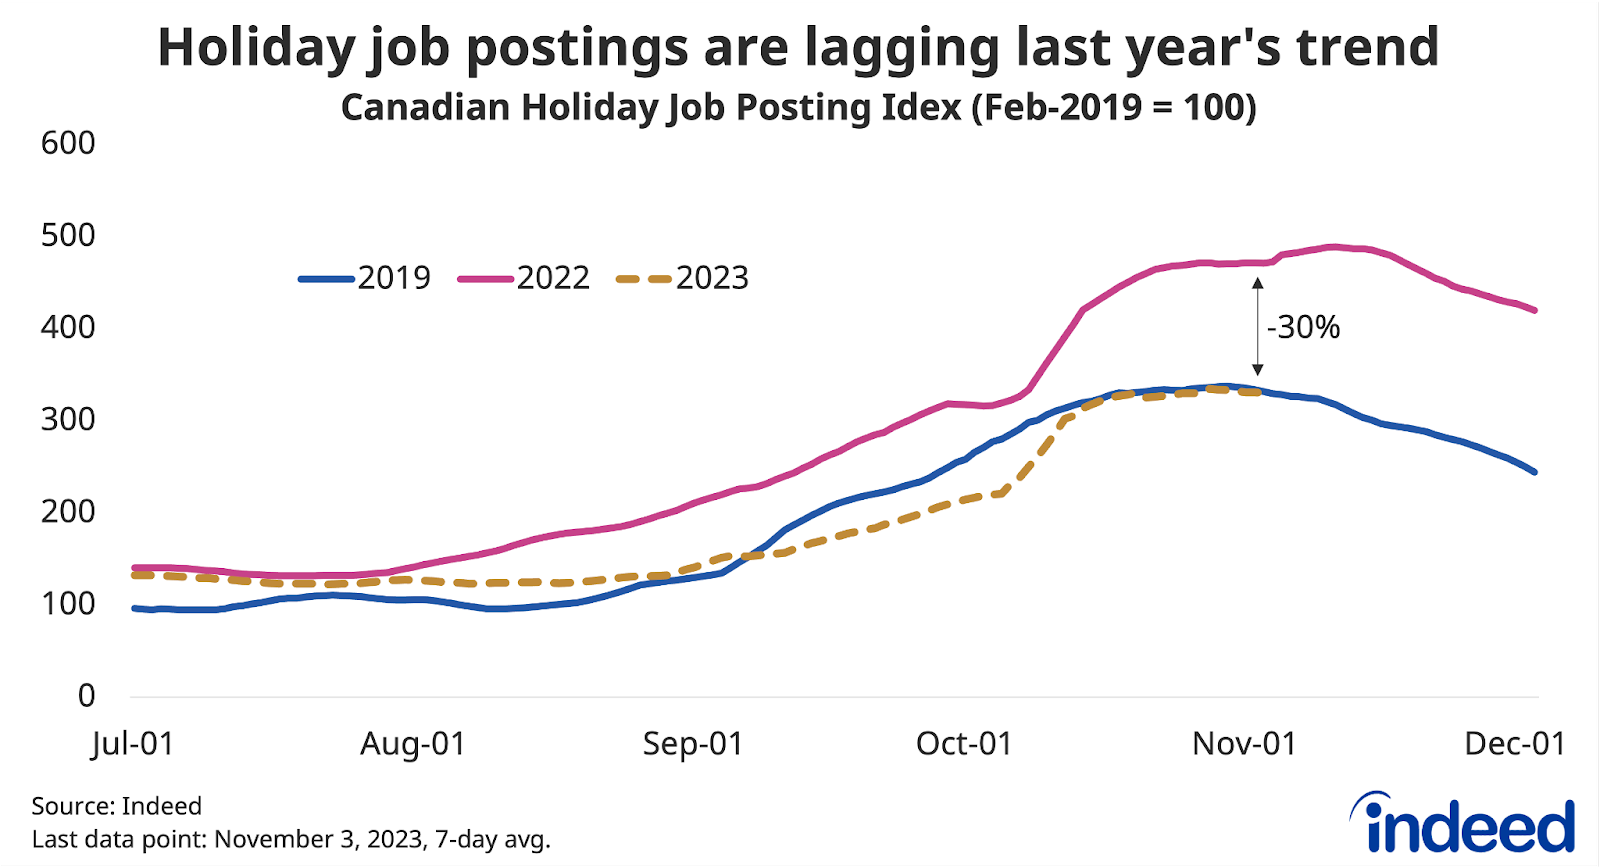 Line chart titled “Holiday job postings are lagging last year’s trend” shows the level of Canadian holiday job postings, indexed to February 1, 2019, with three lines representing their trend in 2019, 2022, and 2023, respectively. As of November 3, 2023, holiday postings were similar to their level in 2019, but down 30% from where they stood a year earlier.